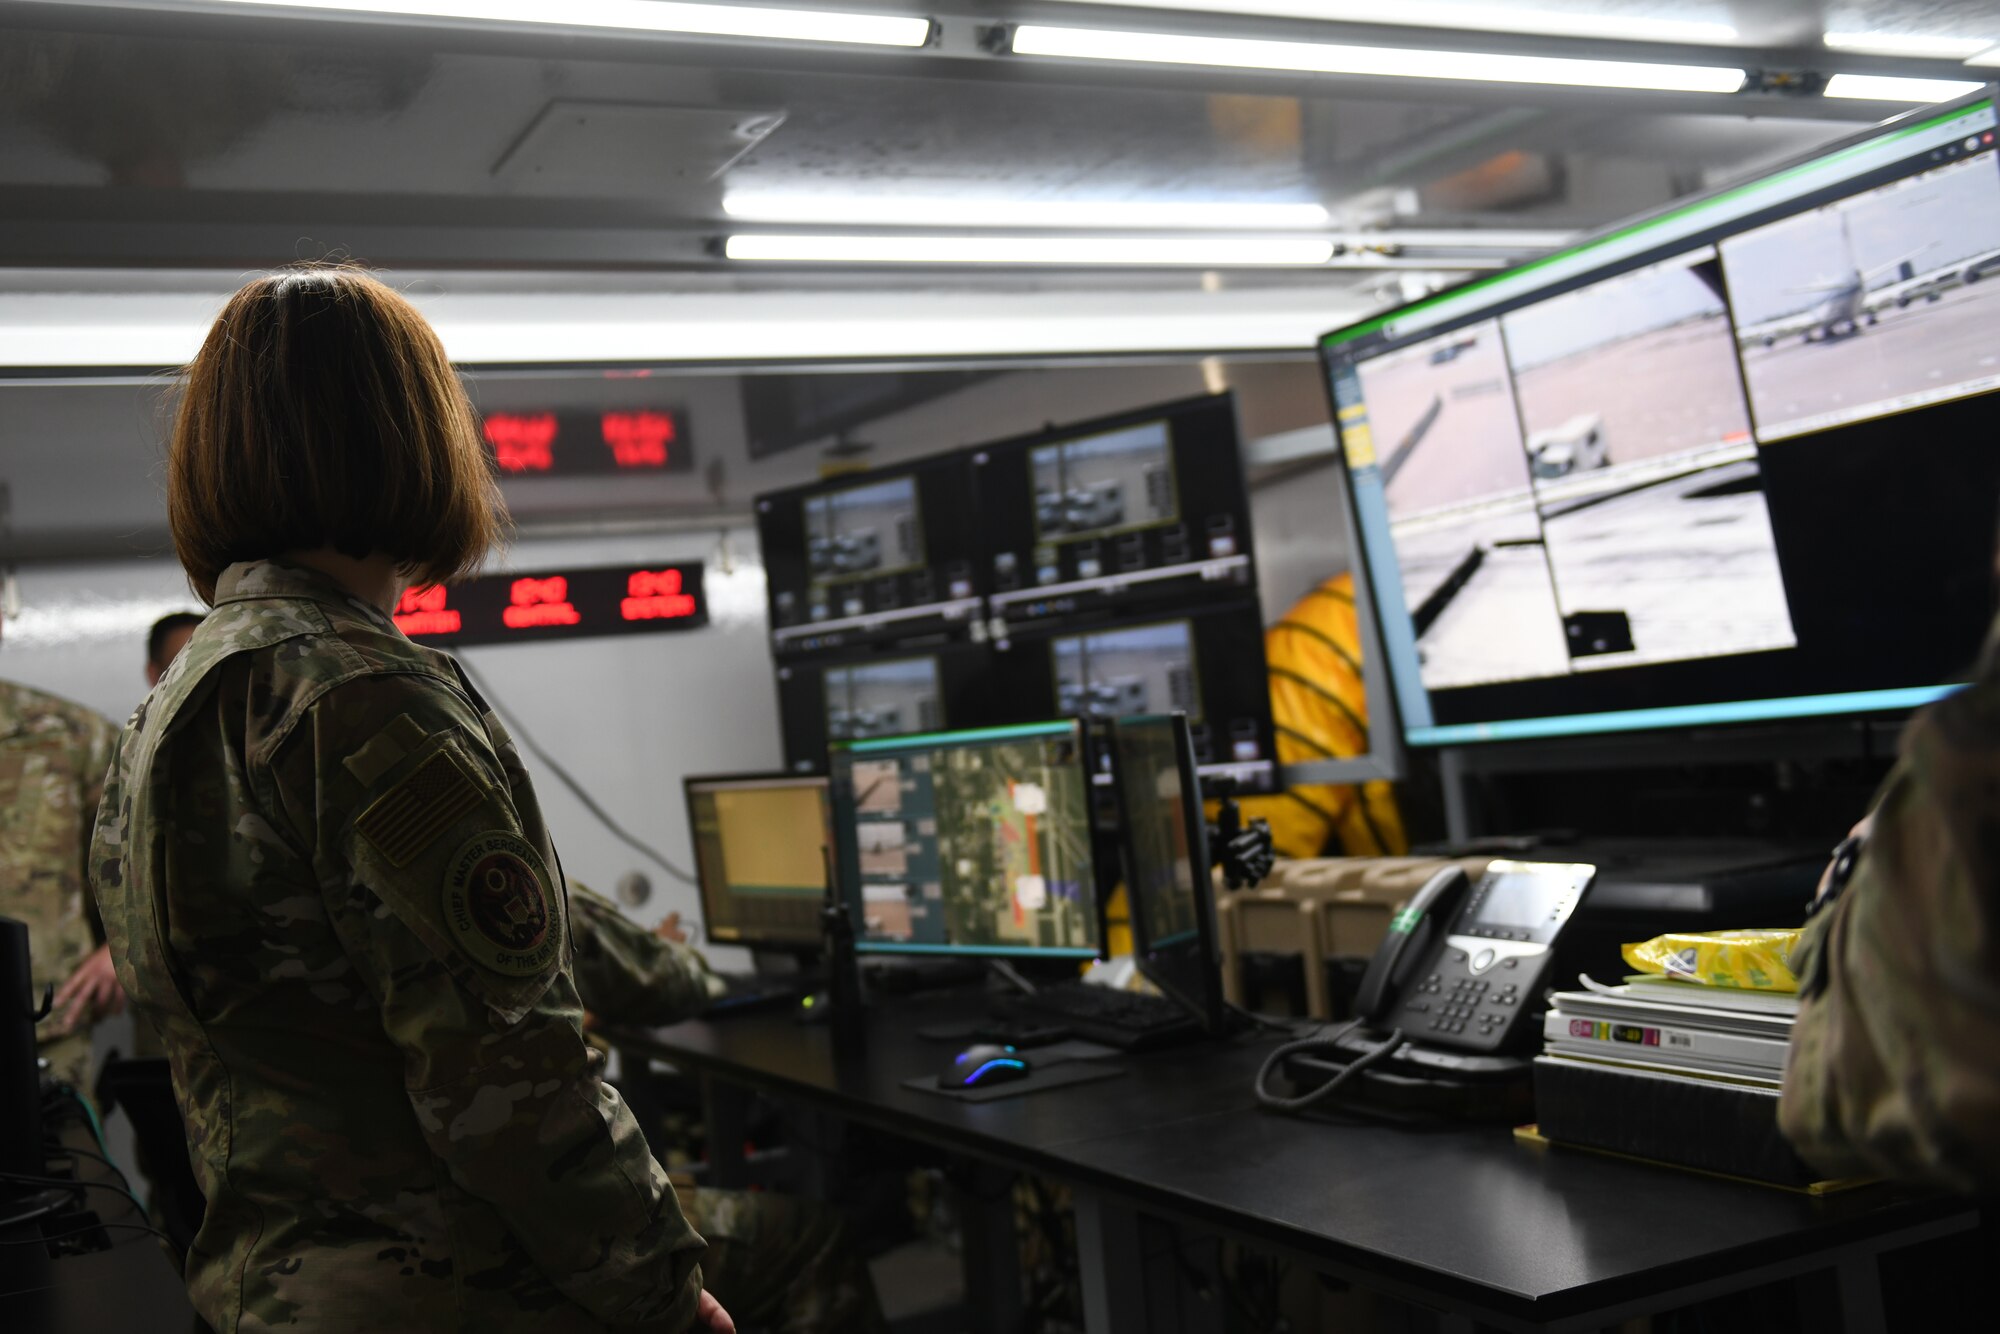 Chief Master Sergeant of the Air Force JoAnne S. Bass looks at television monitors in the mobile base defense operations center.